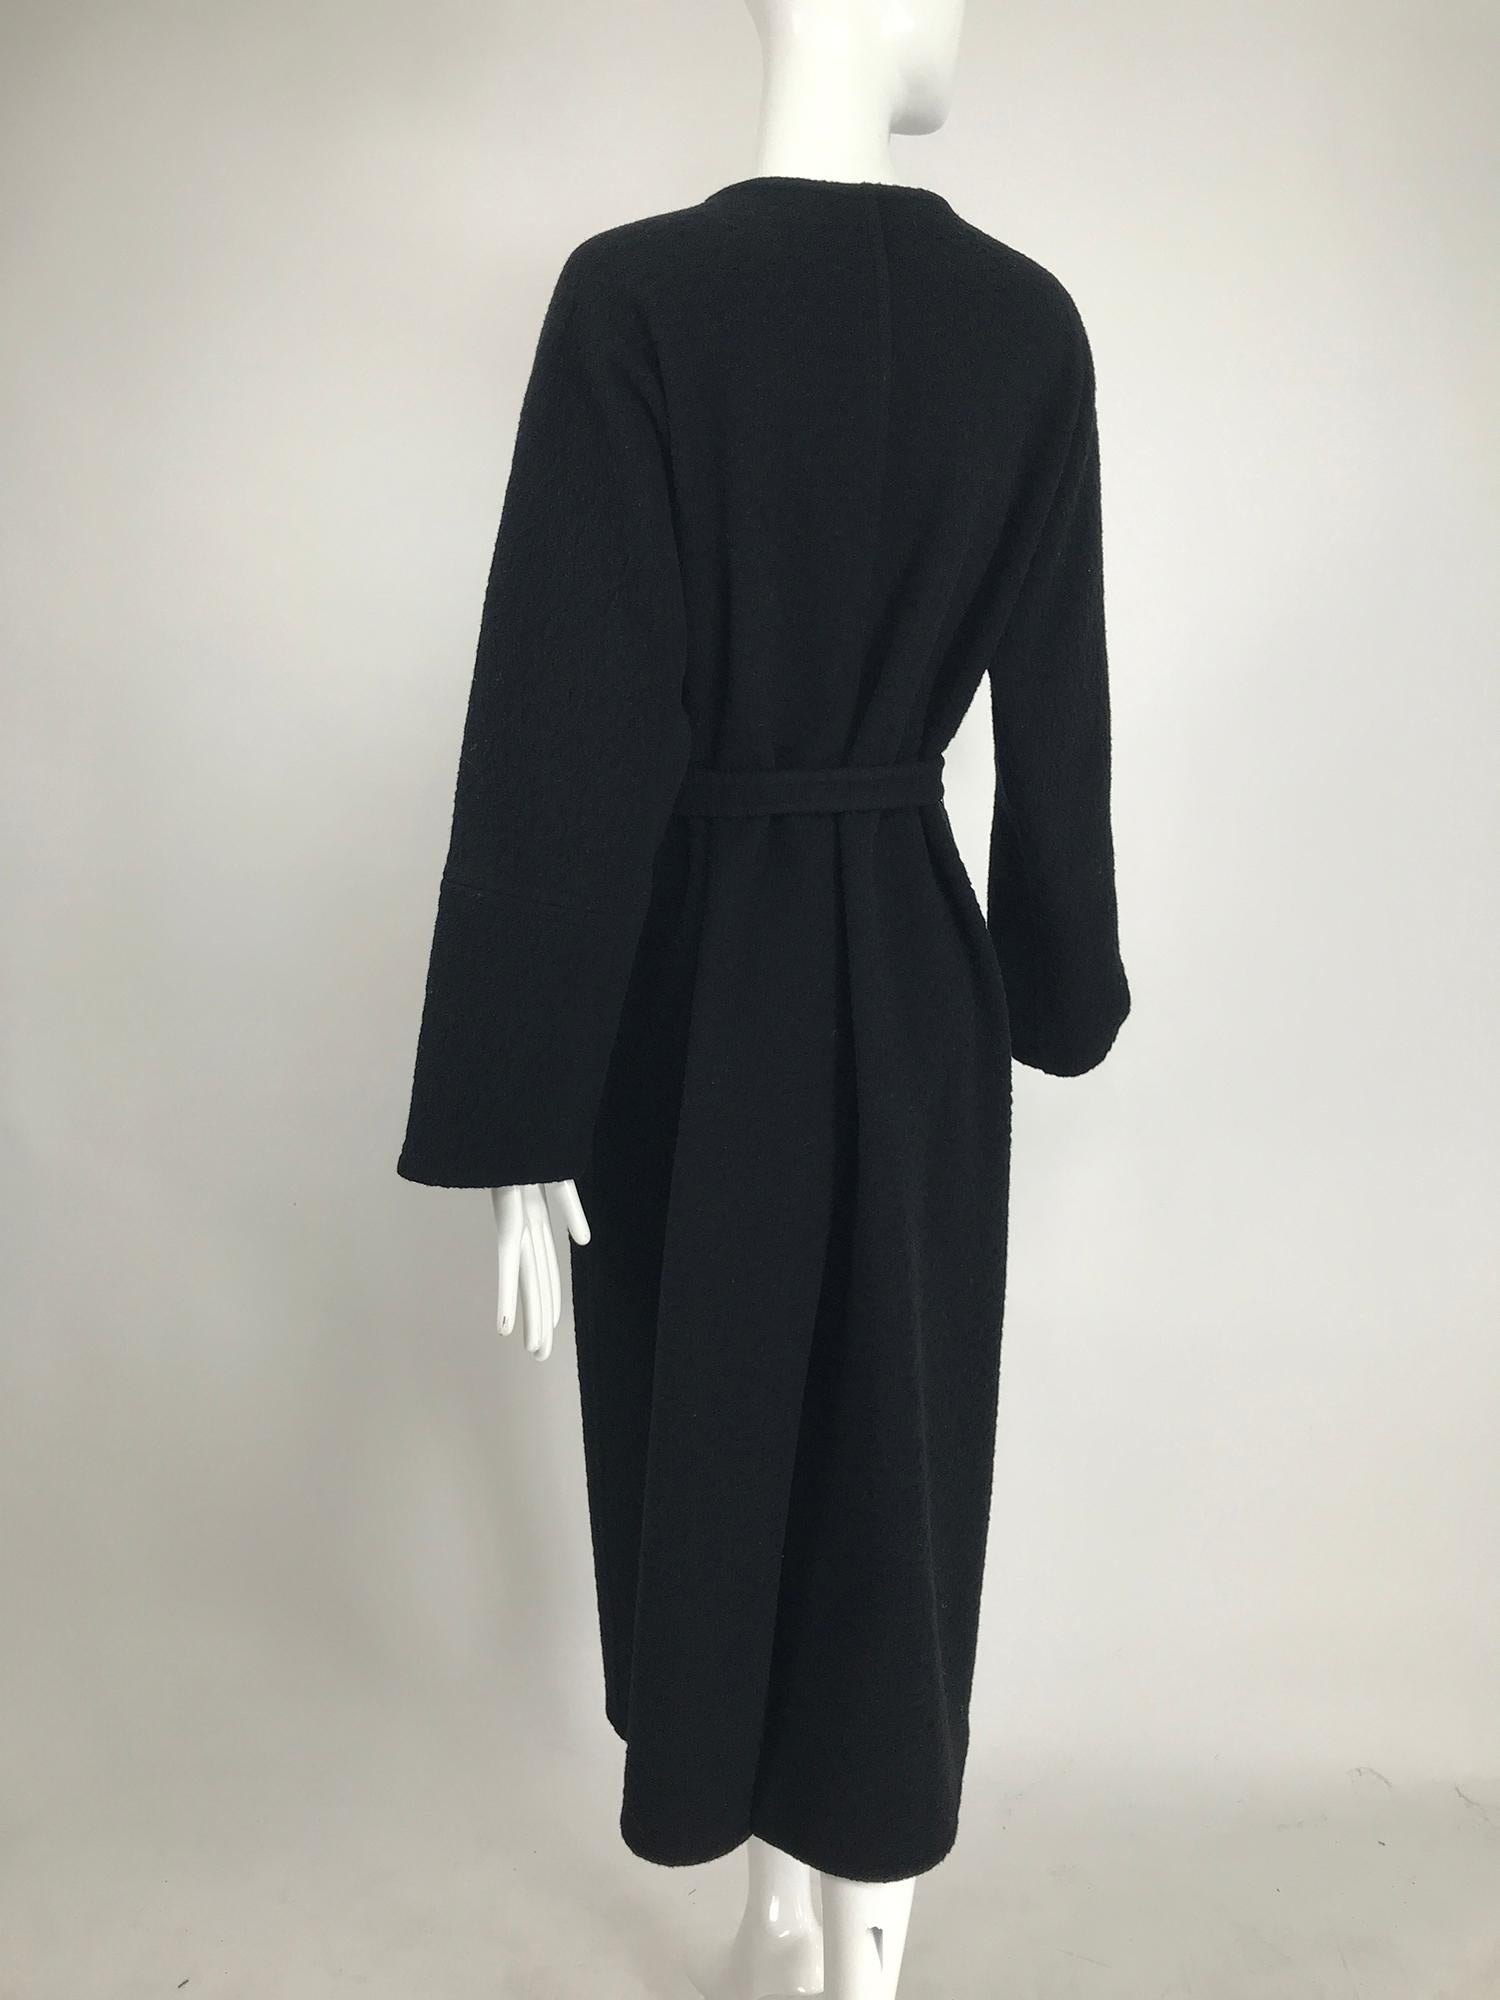 Vintage Yeohlee Black Textured Double Face Wool Wrap Coat 1990s For Sale 4